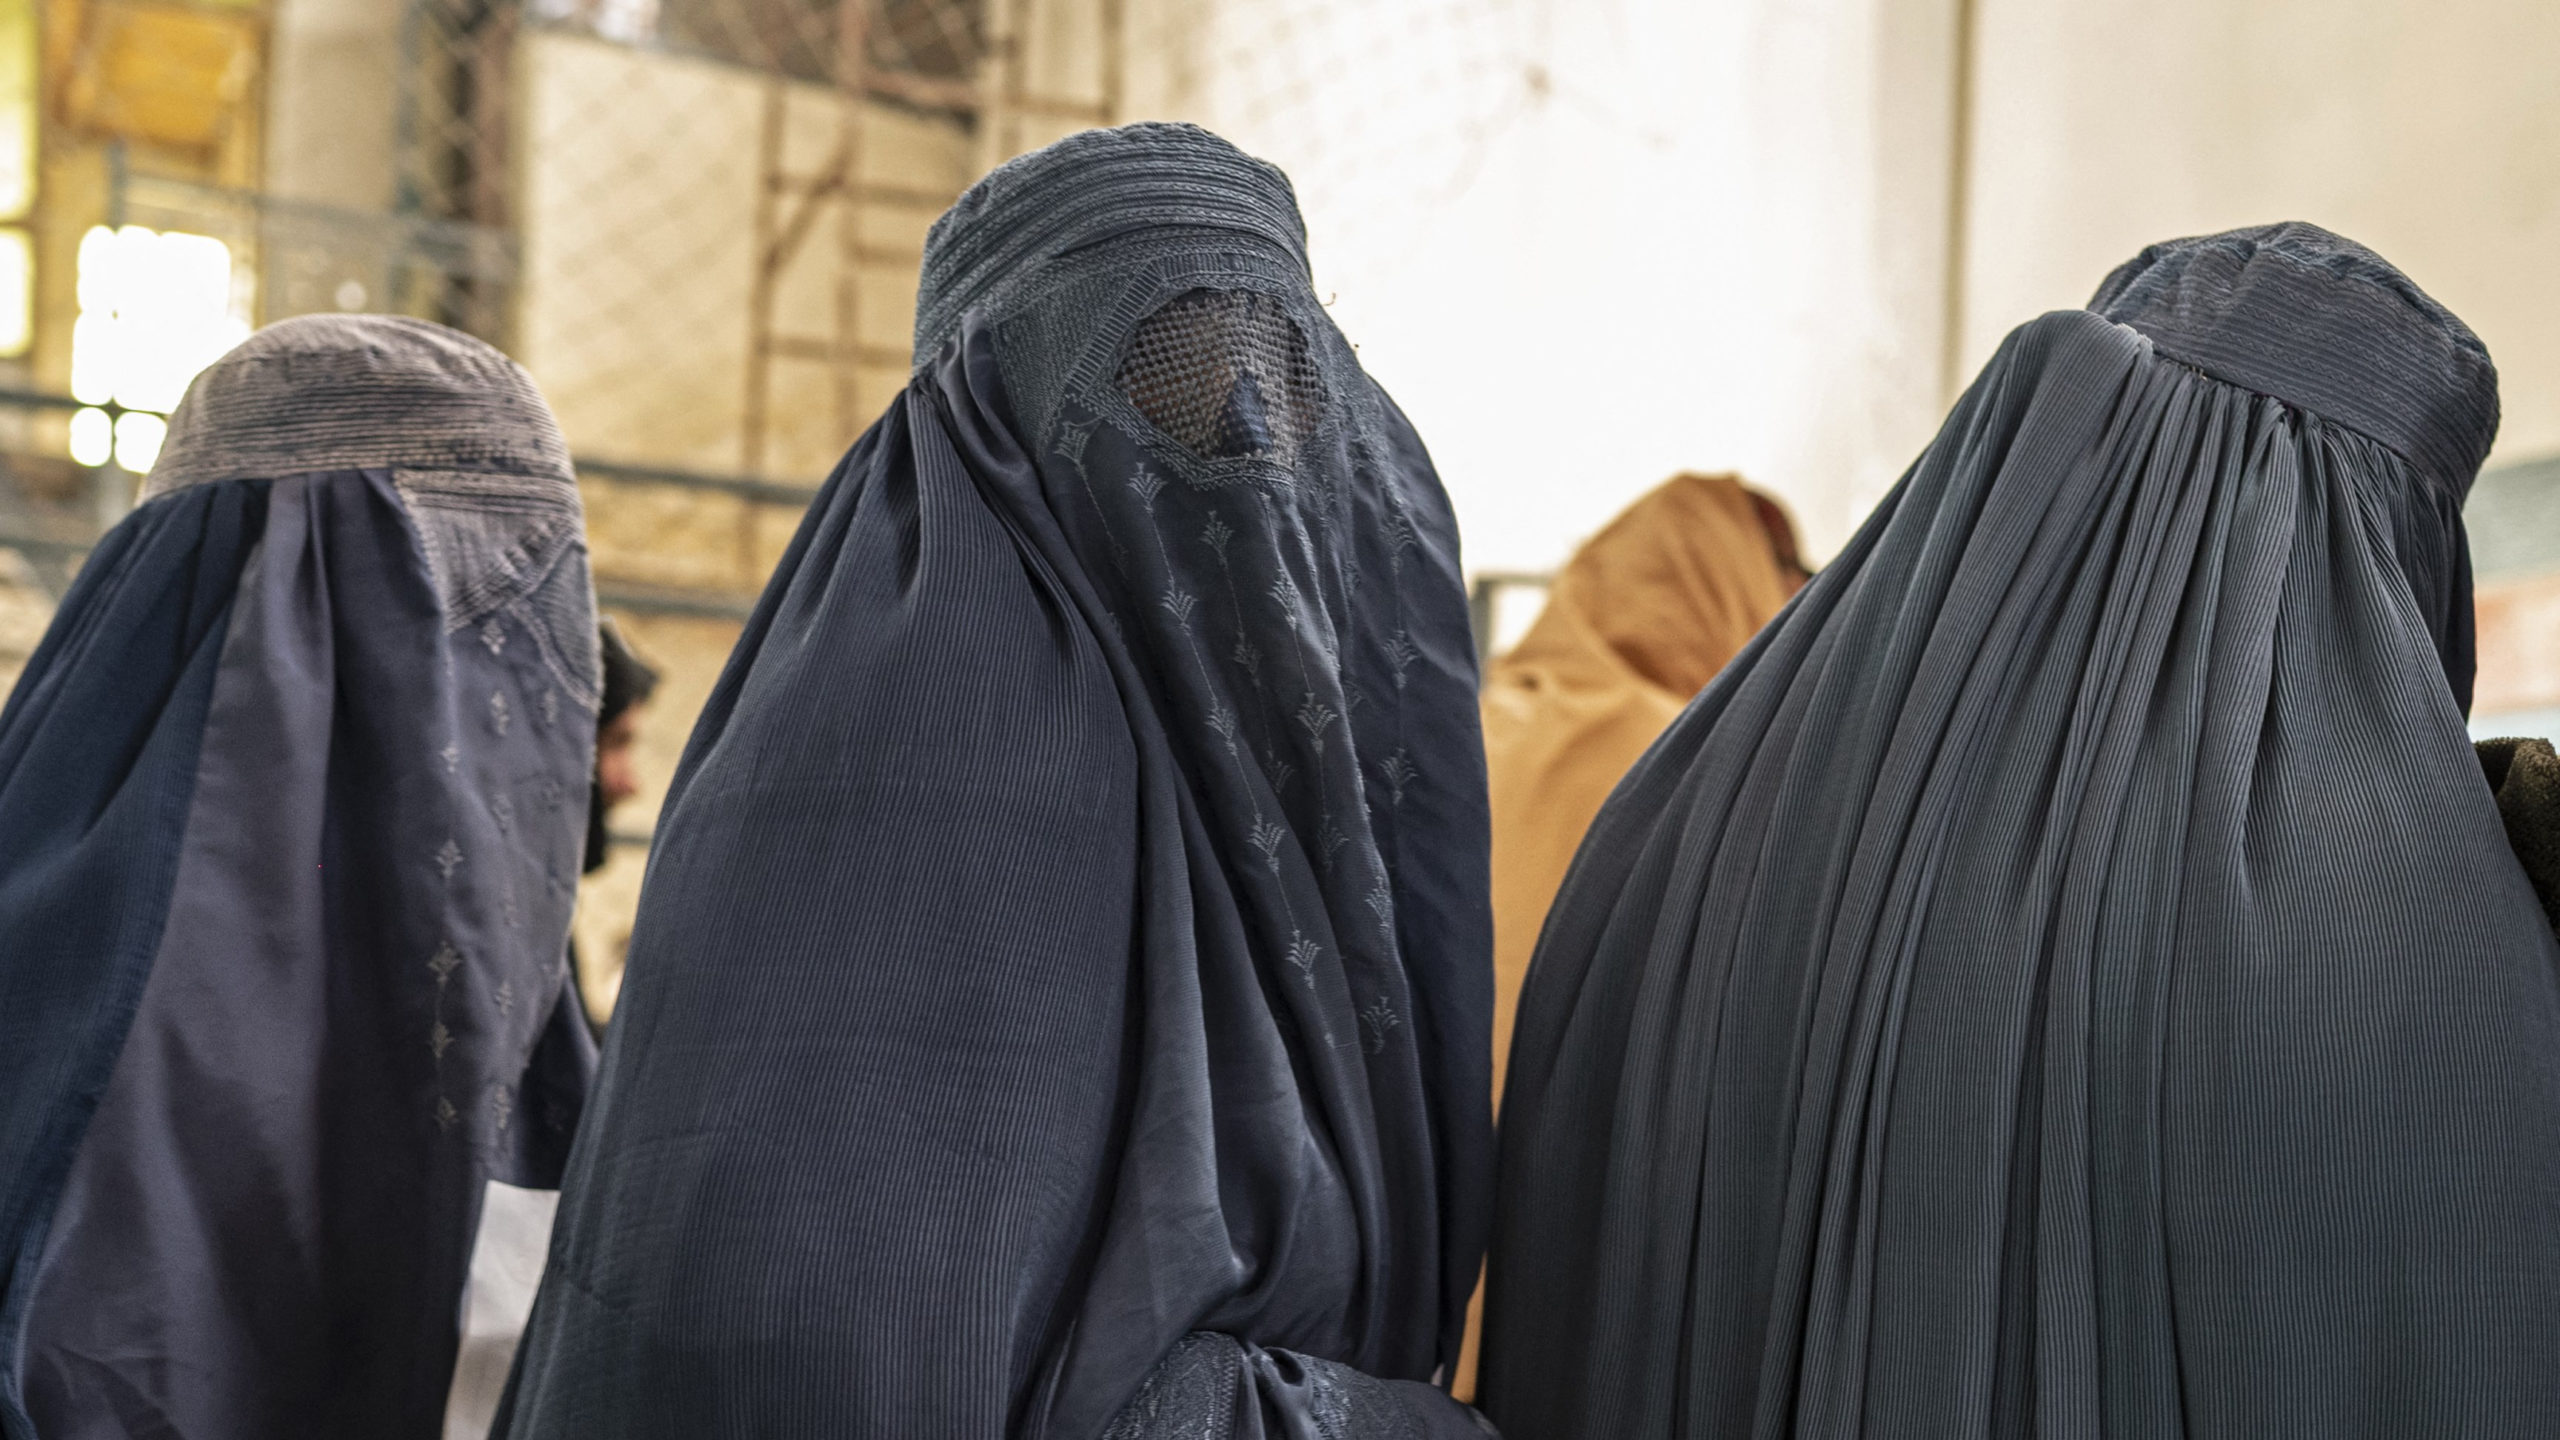 Afghan burqa-clad women stand in a queue as they wait to receive food aid from a non-governmental organisation (NGO) at a gymnasium in Kabul on January 17, 2023. – At least three leading international aid agencies have partially resumed life-saving work in Afghanistan, after assurances from the Taliban authorities that Afghan women can continue to work in the health sector. (Photo by Wakil KOHSAR / AFP)